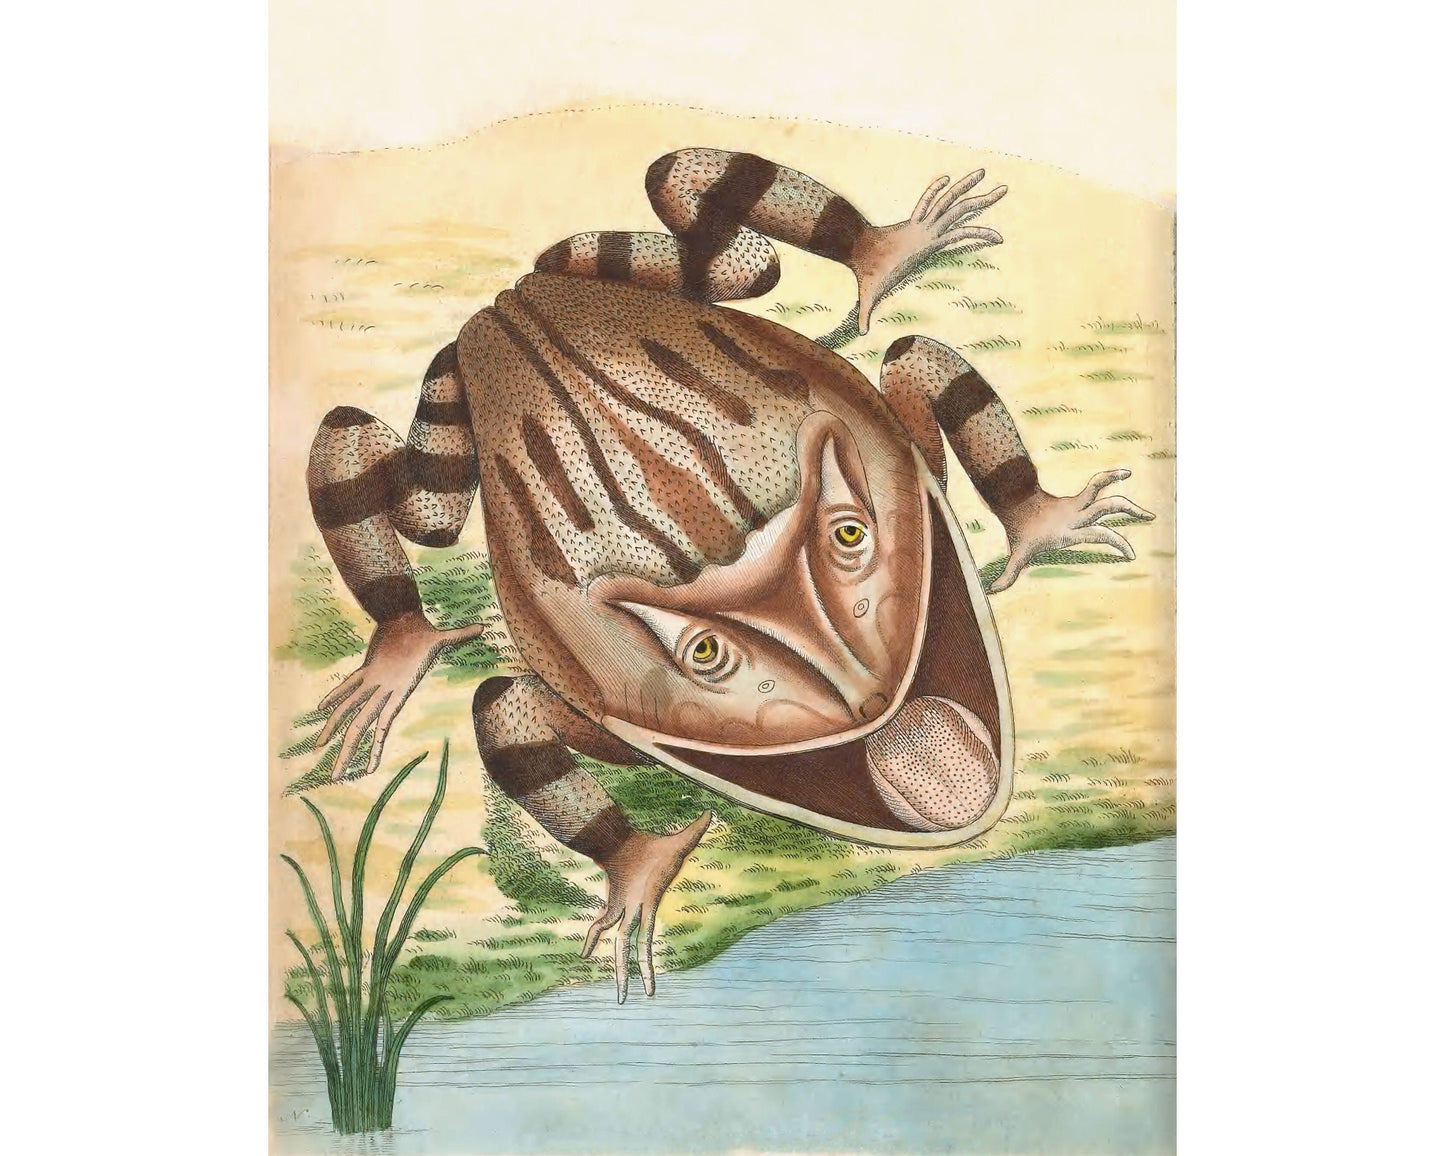 Antique frog art | Horned toad print | 18th century natural history | Water, swamp animal | Modern vintage décor | Eco-friendly gift